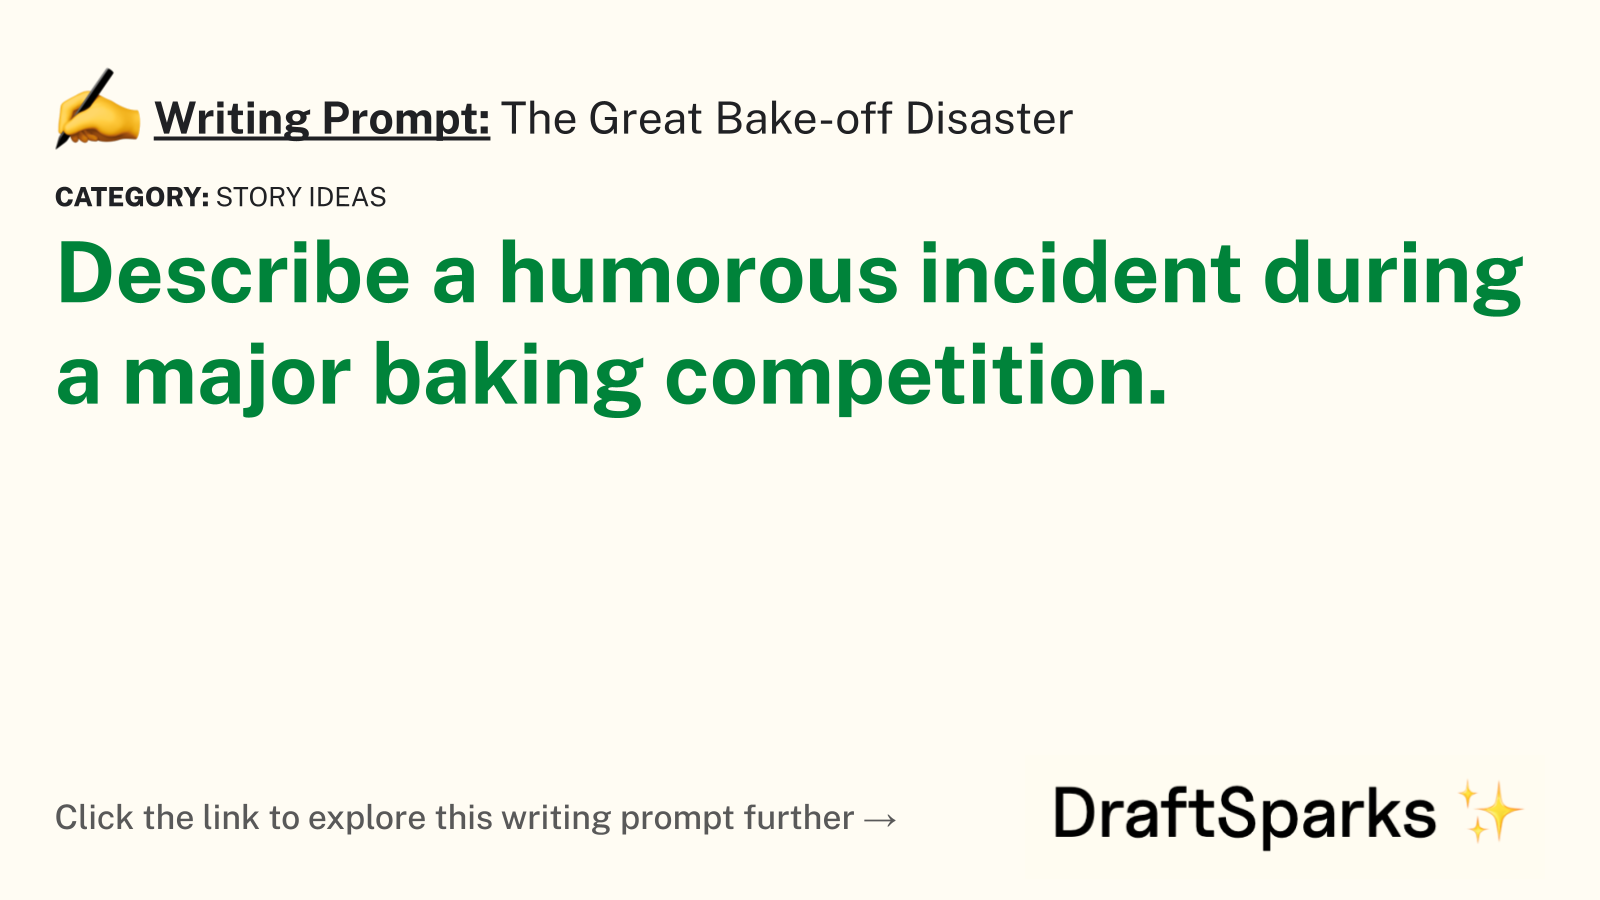 The Great Bake-off Disaster